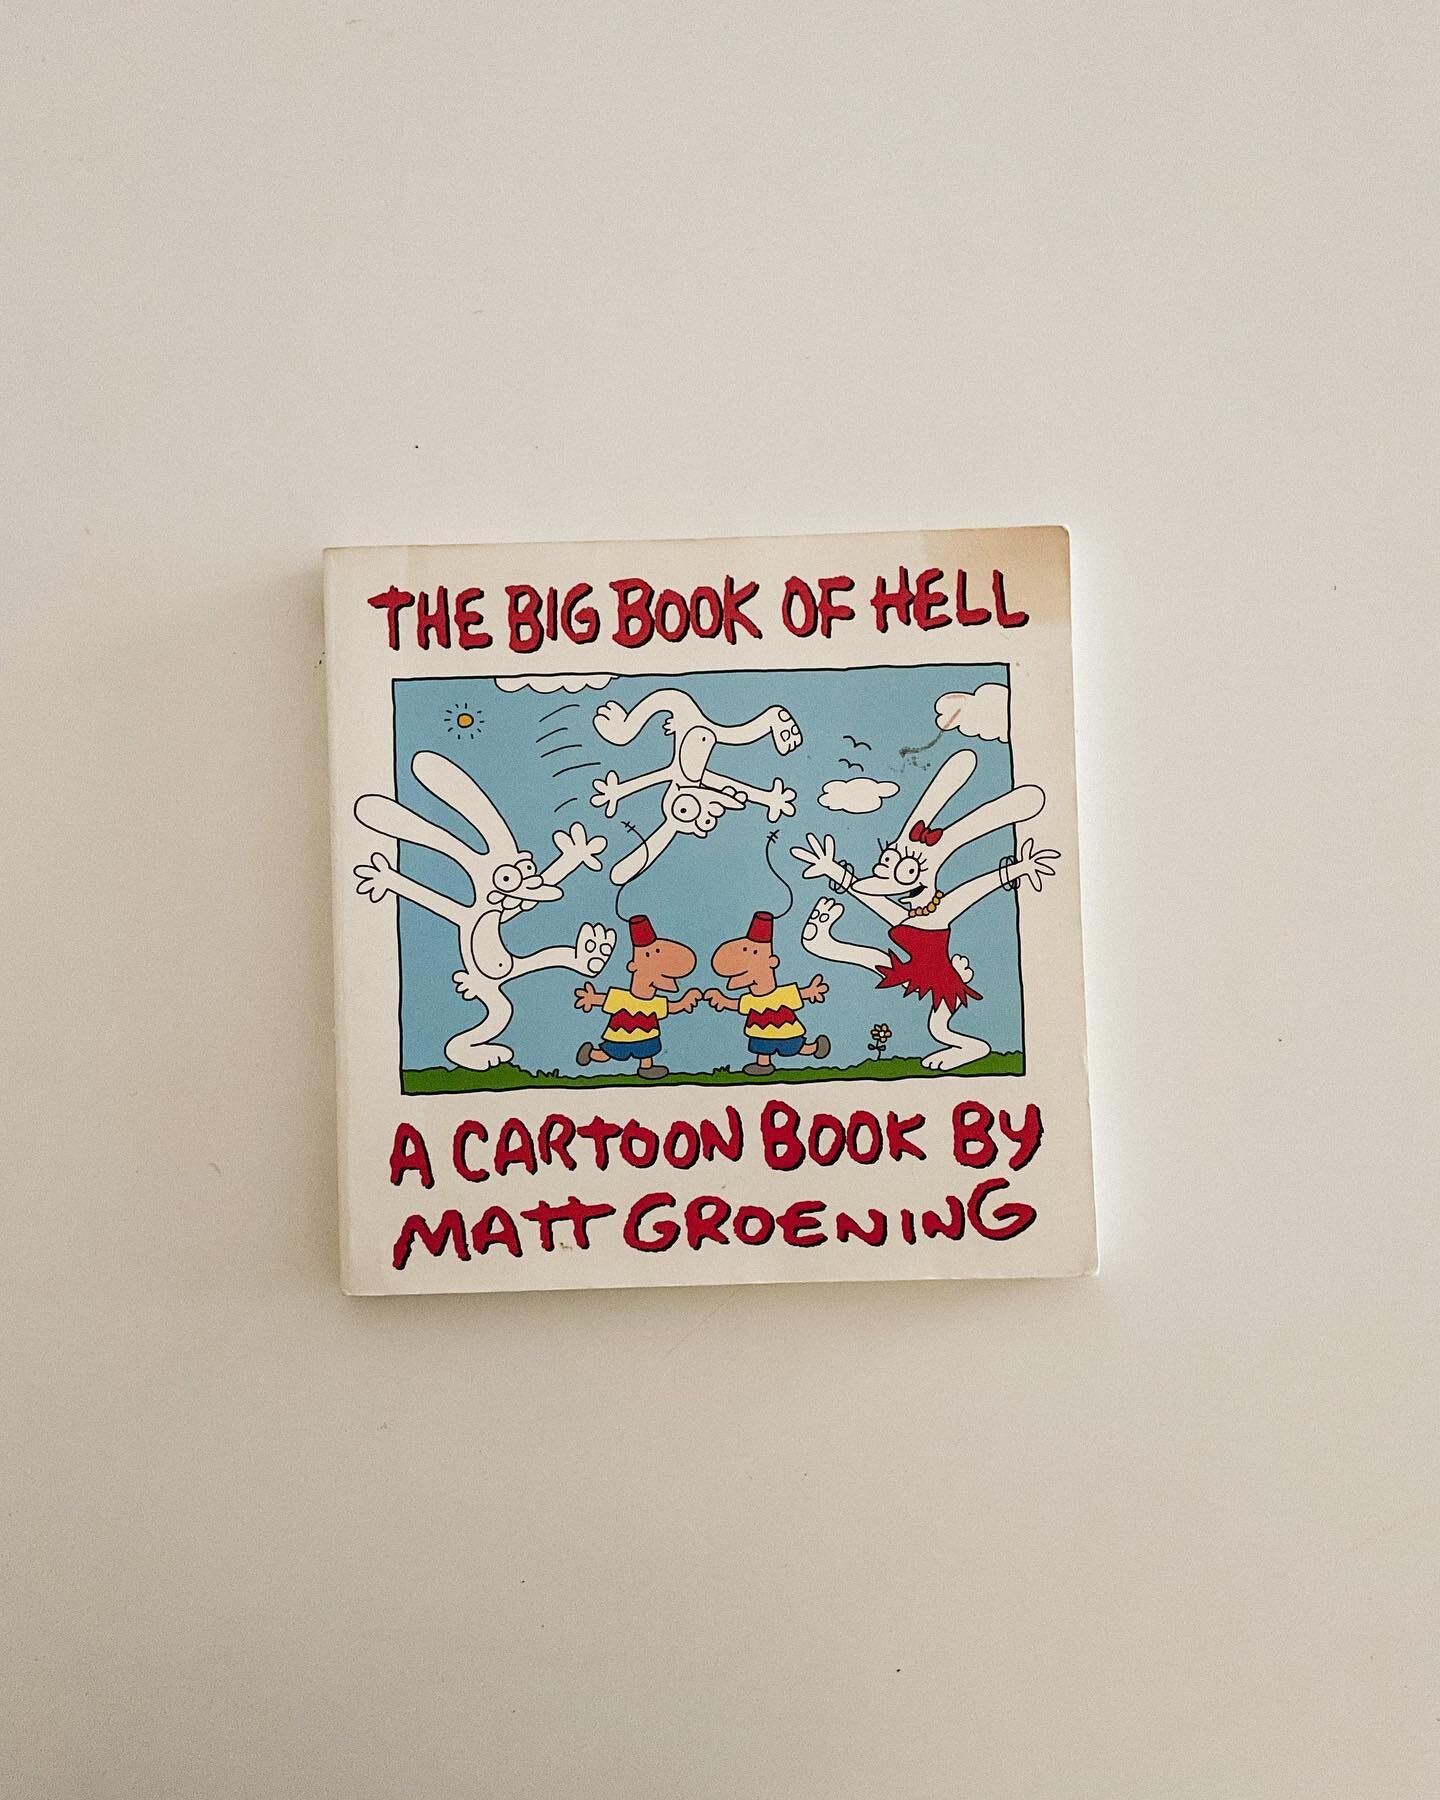 The Big Book of Hell, 1990 Pantheon Books. Includes the greatest hits from all 5 &ldquo;Hell&rdquo; books, the first &ldquo;Life in Hell&rdquo; strip, and a sneak preview of Bart Simpson!